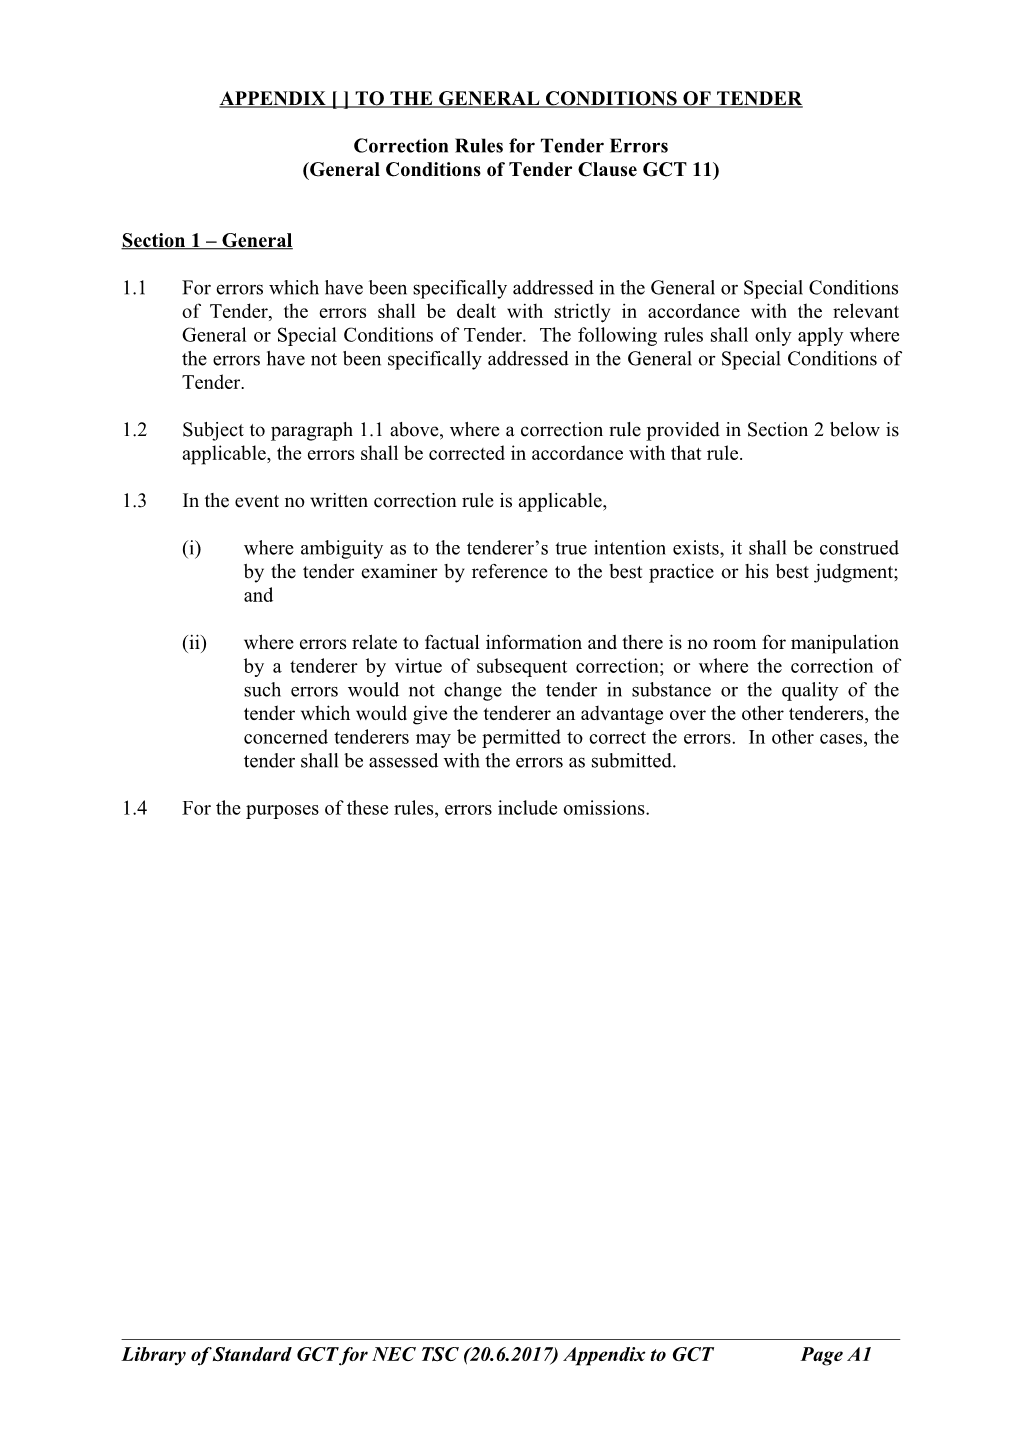 Appendix to the General Conditions of Tender